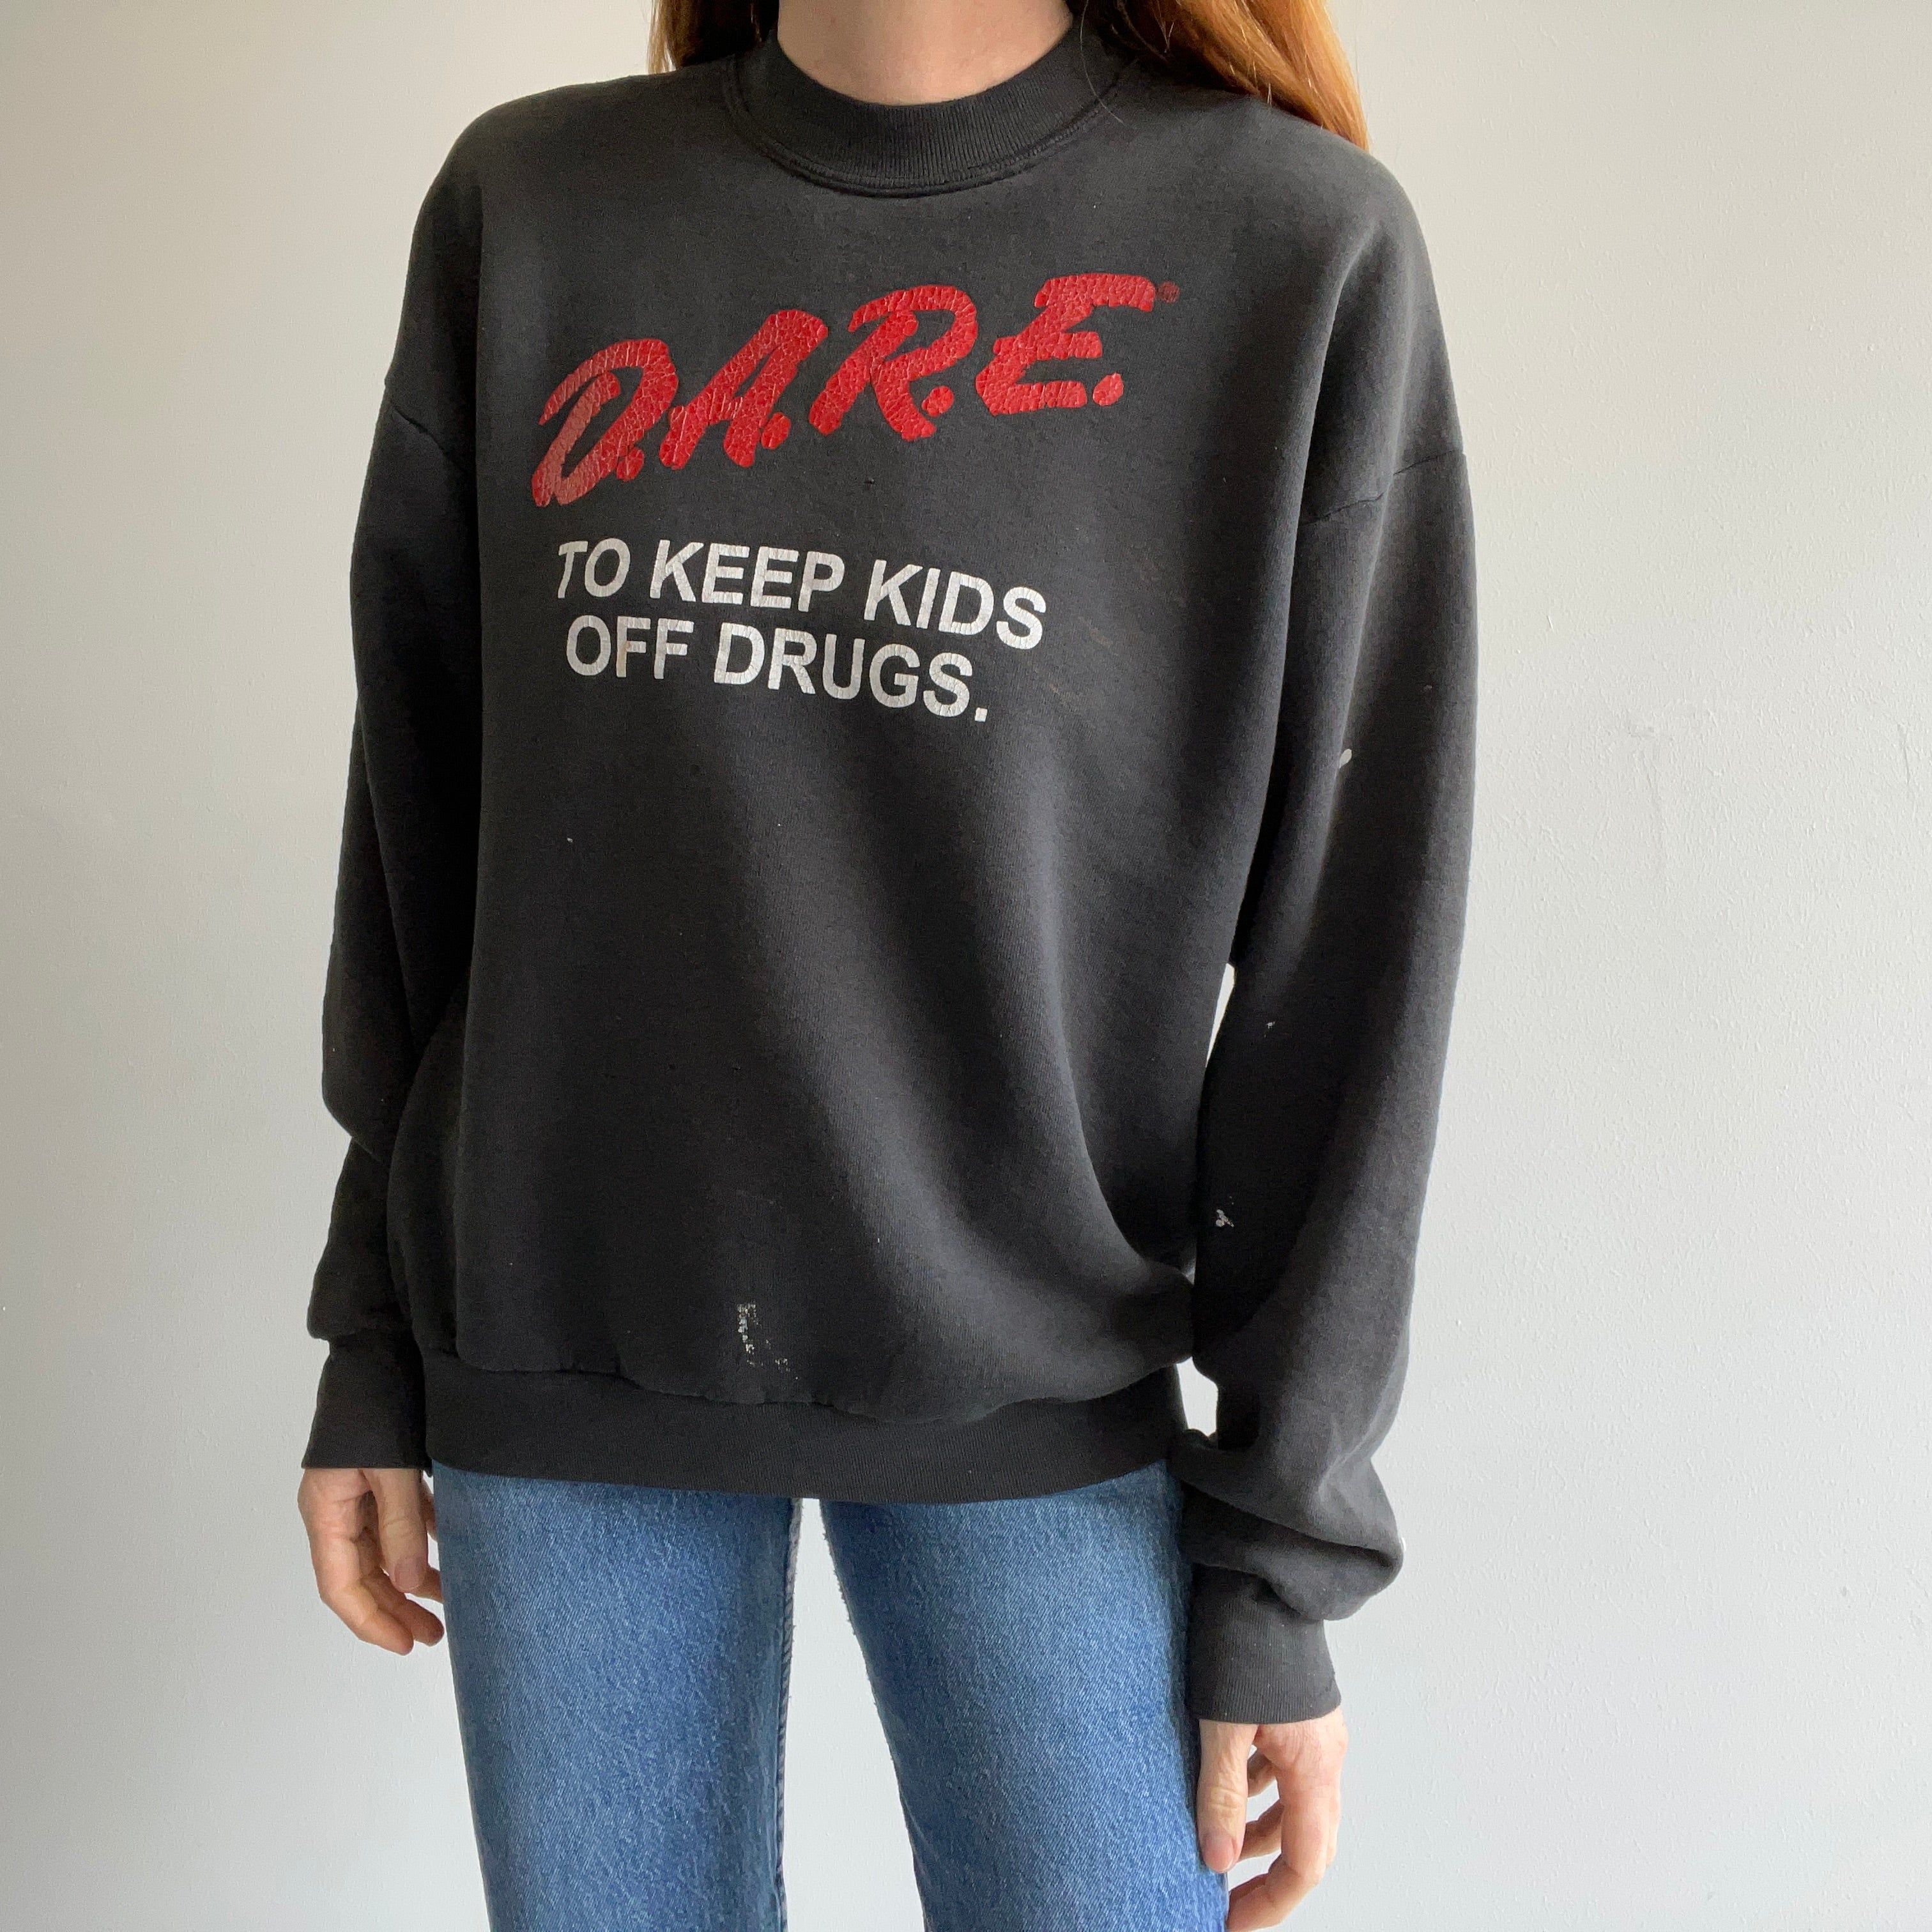 1980/90s D.A.R.E Paint Stained and Tattered Sweatshirt